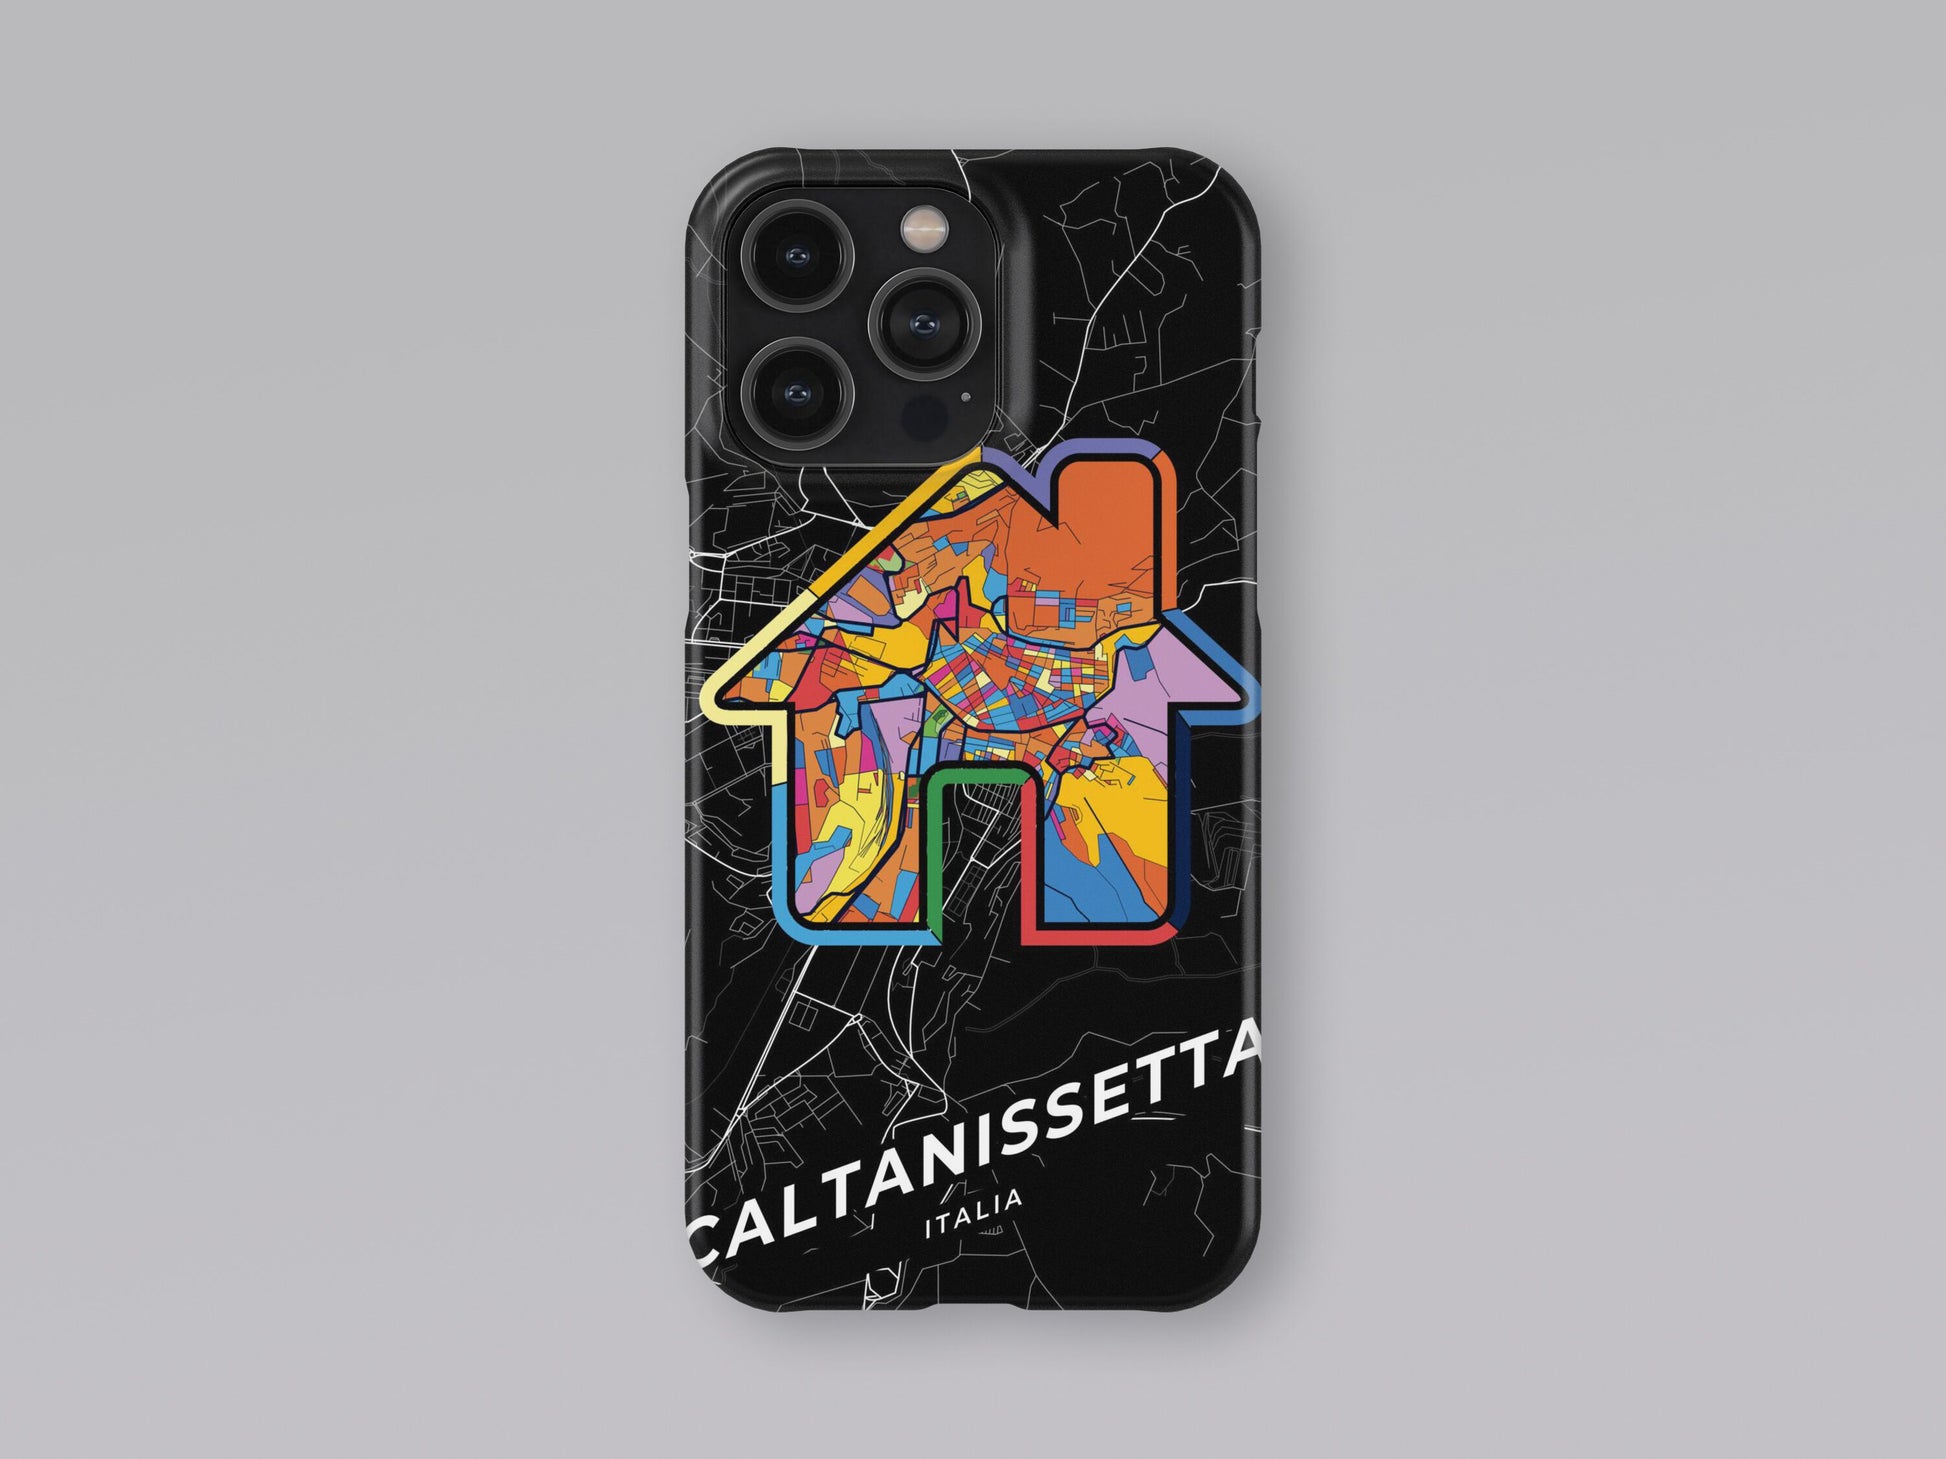 Caltanissetta Italy slim phone case with colorful icon. Birthday, wedding or housewarming gift. Couple match cases. 3